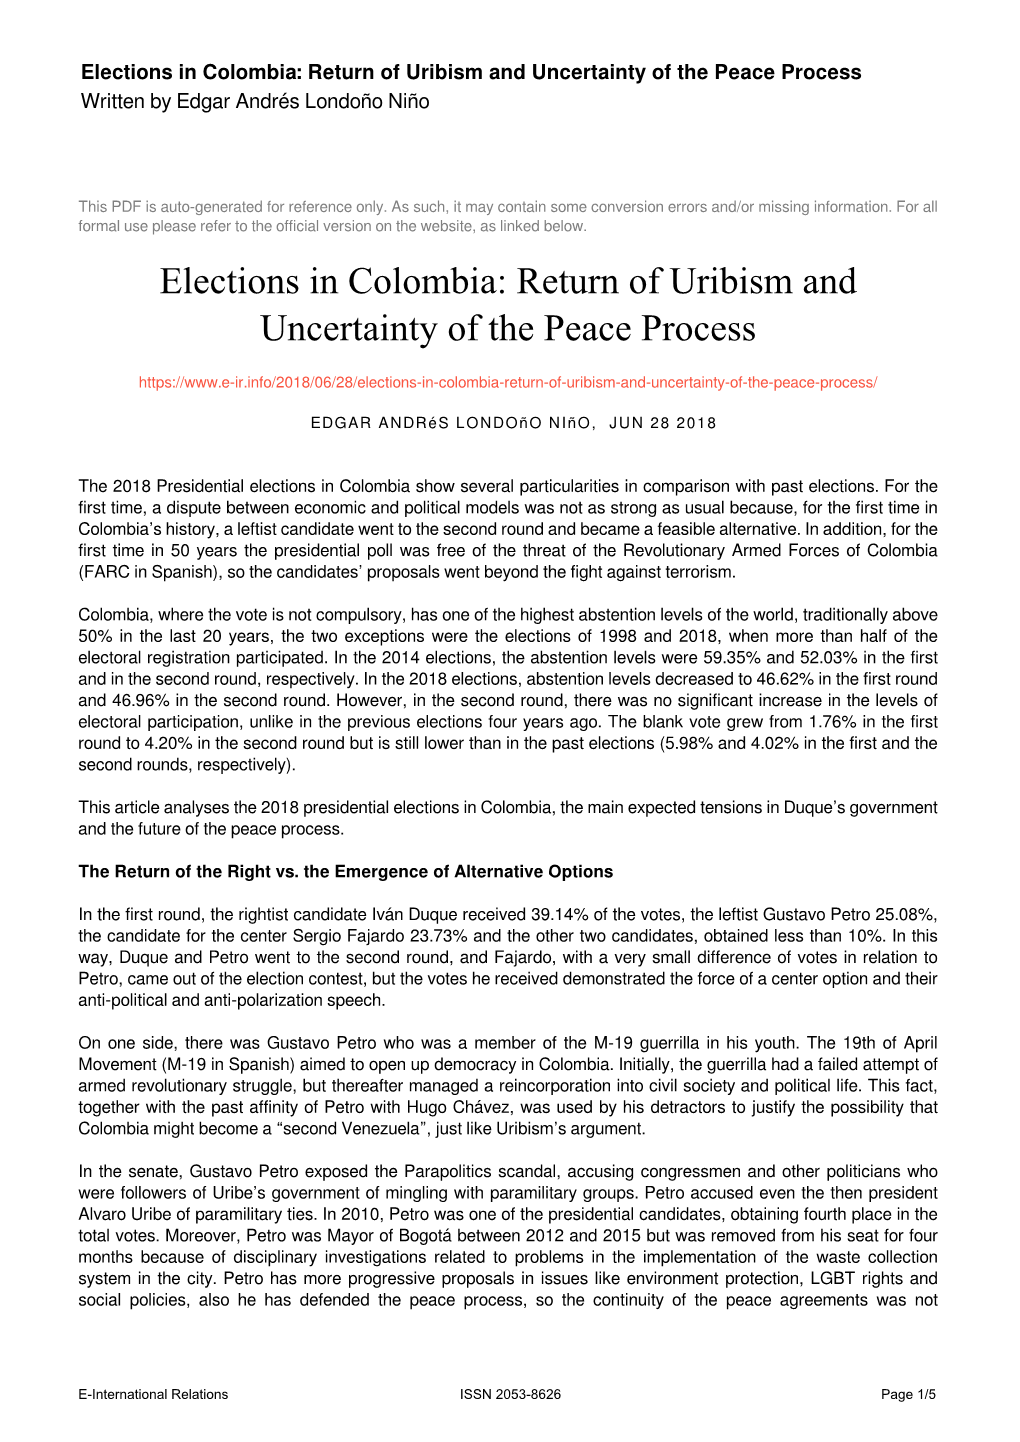 Elections in Colombia: Return of Uribism and Uncertainty of the Peace Process Written by Edgar Andrés Londoño Niño